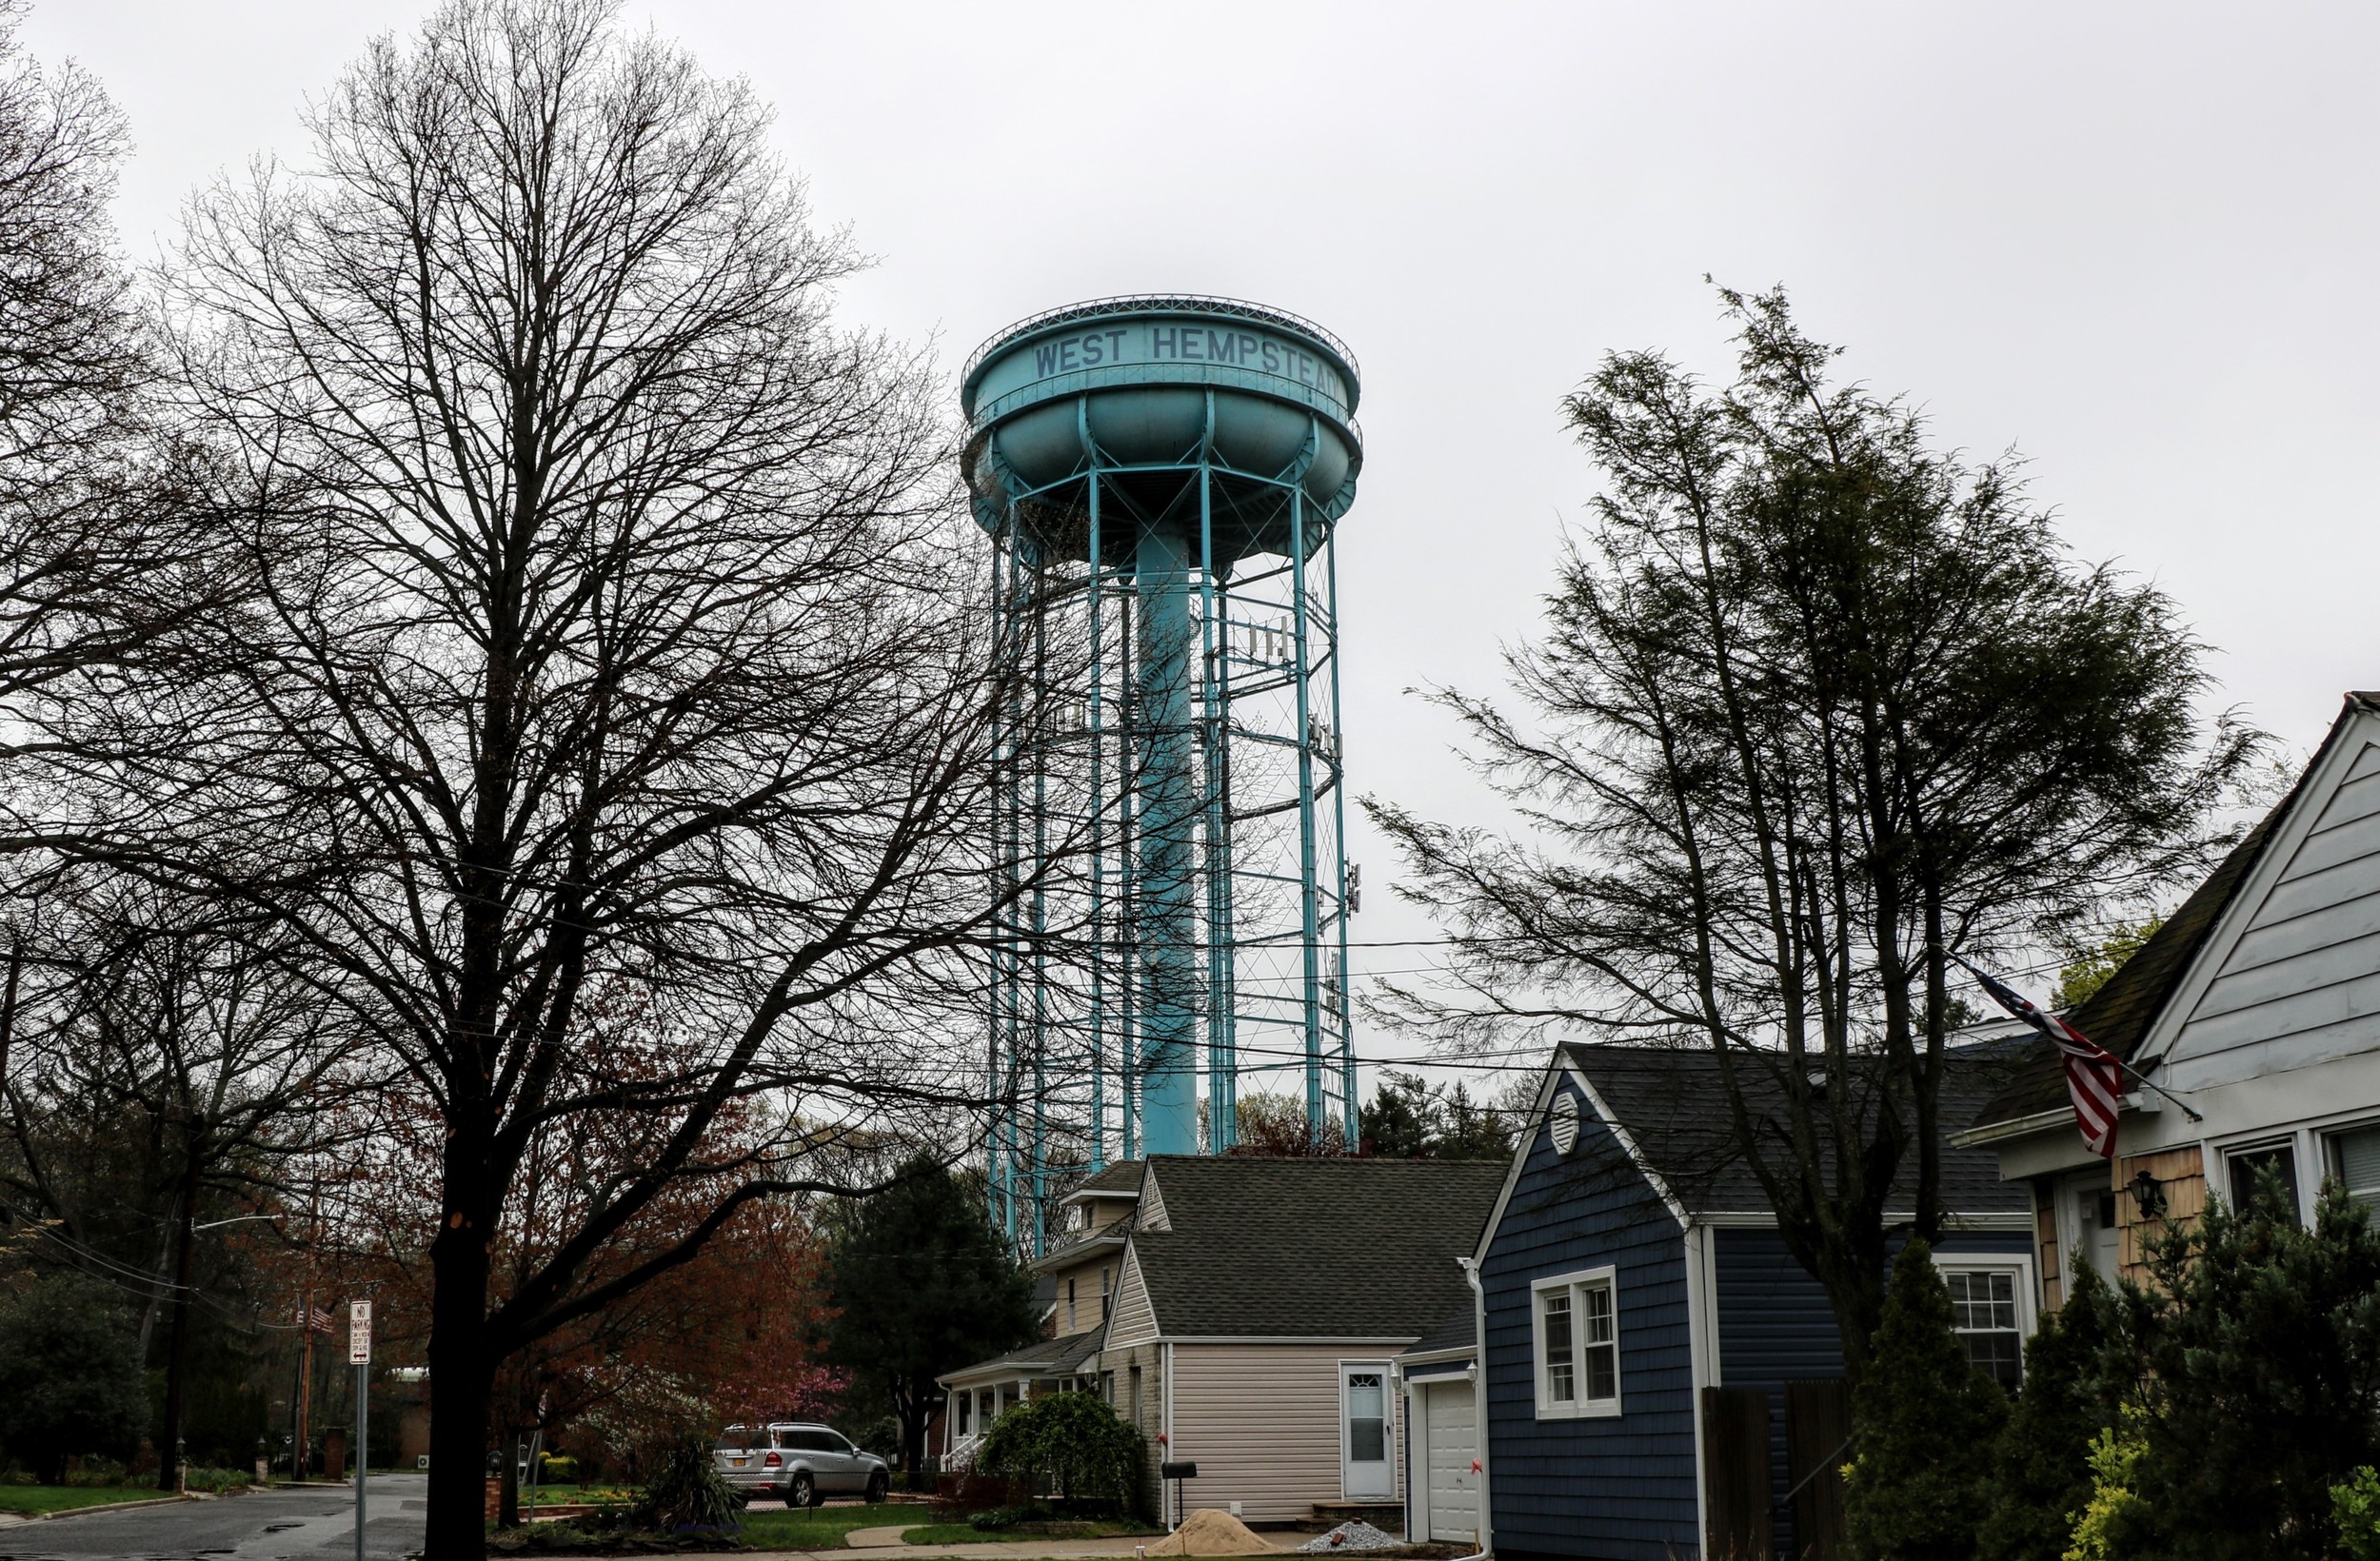 The 225-foot-tall West Hempstead water tower, which has served the community since 1939, will be replaced either this year or next, at a cost of $6.9 million.